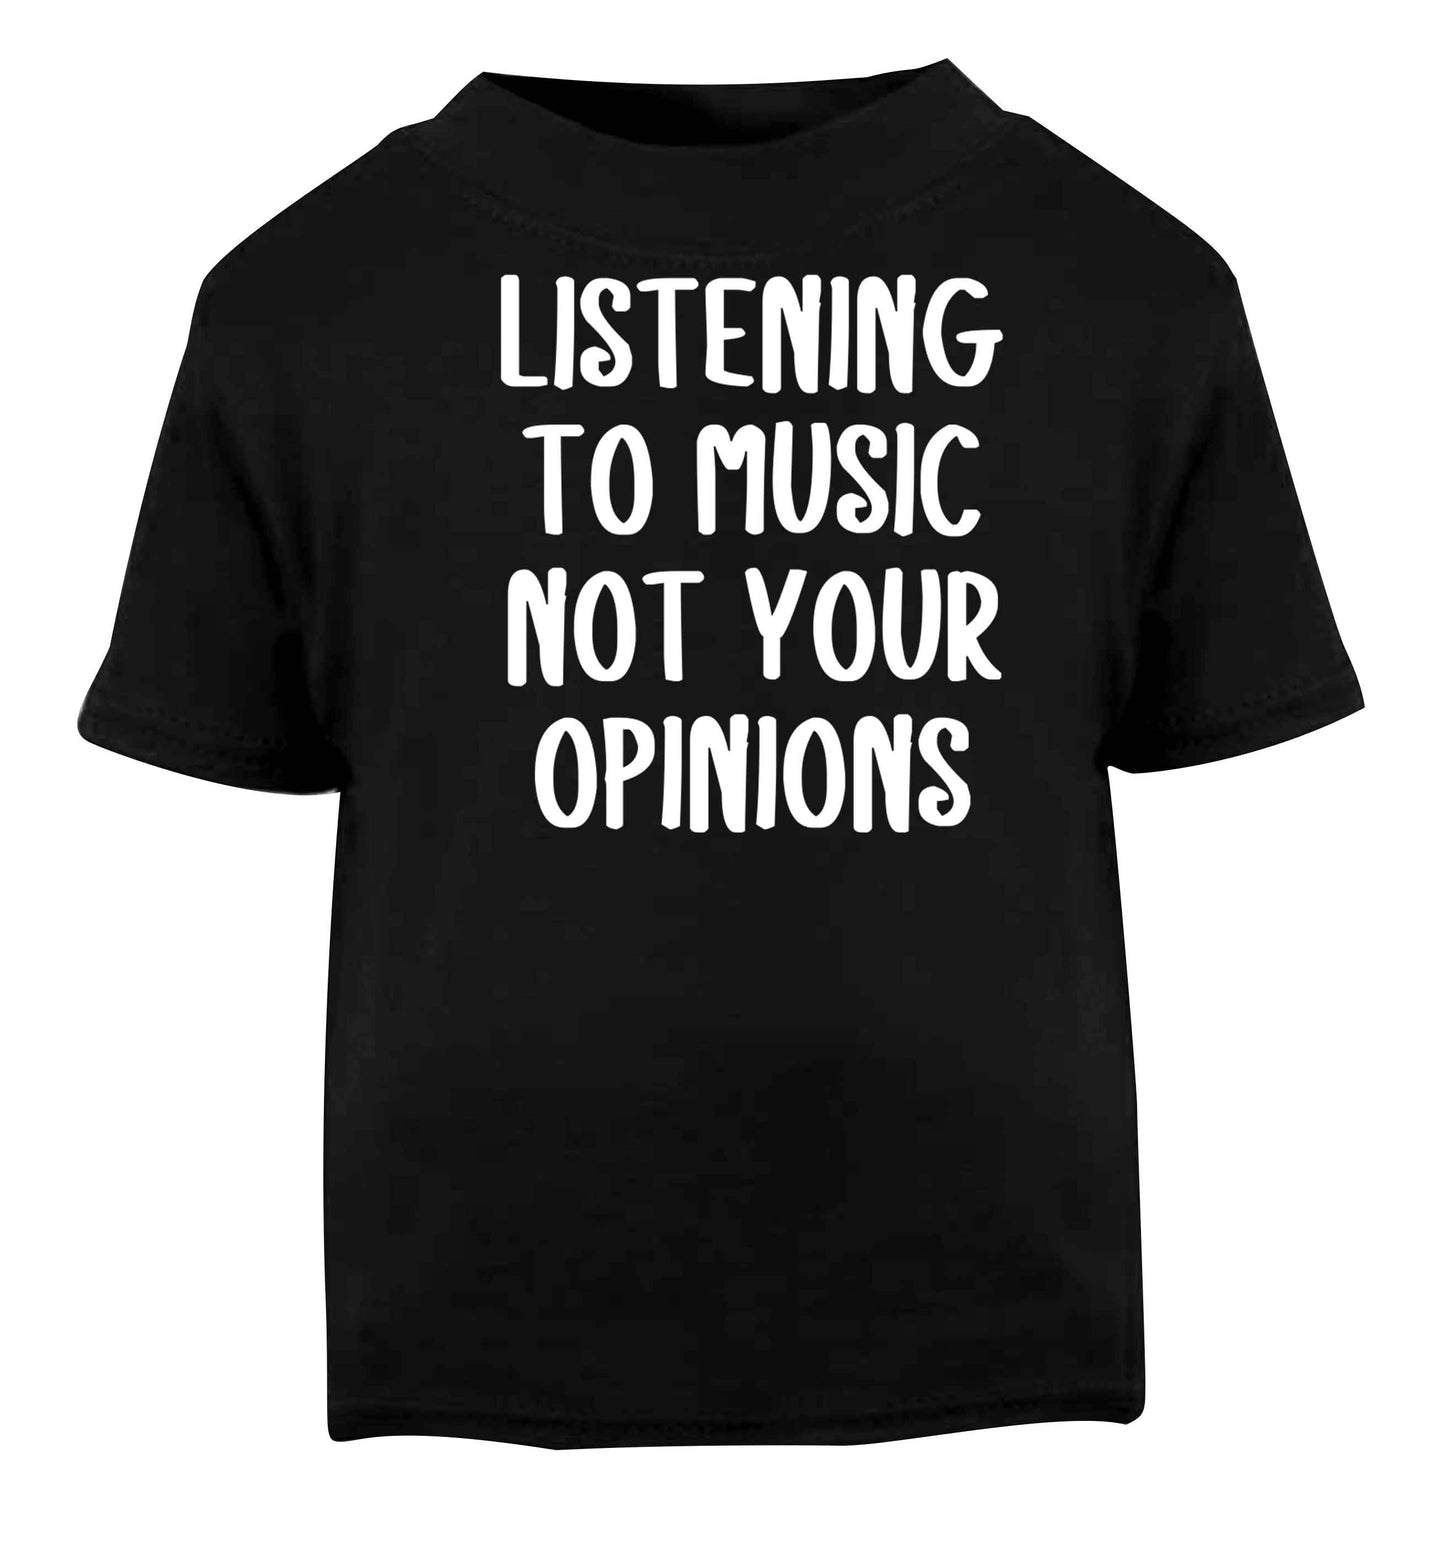 Listening to music not your opinions Black baby toddler Tshirt 2 years